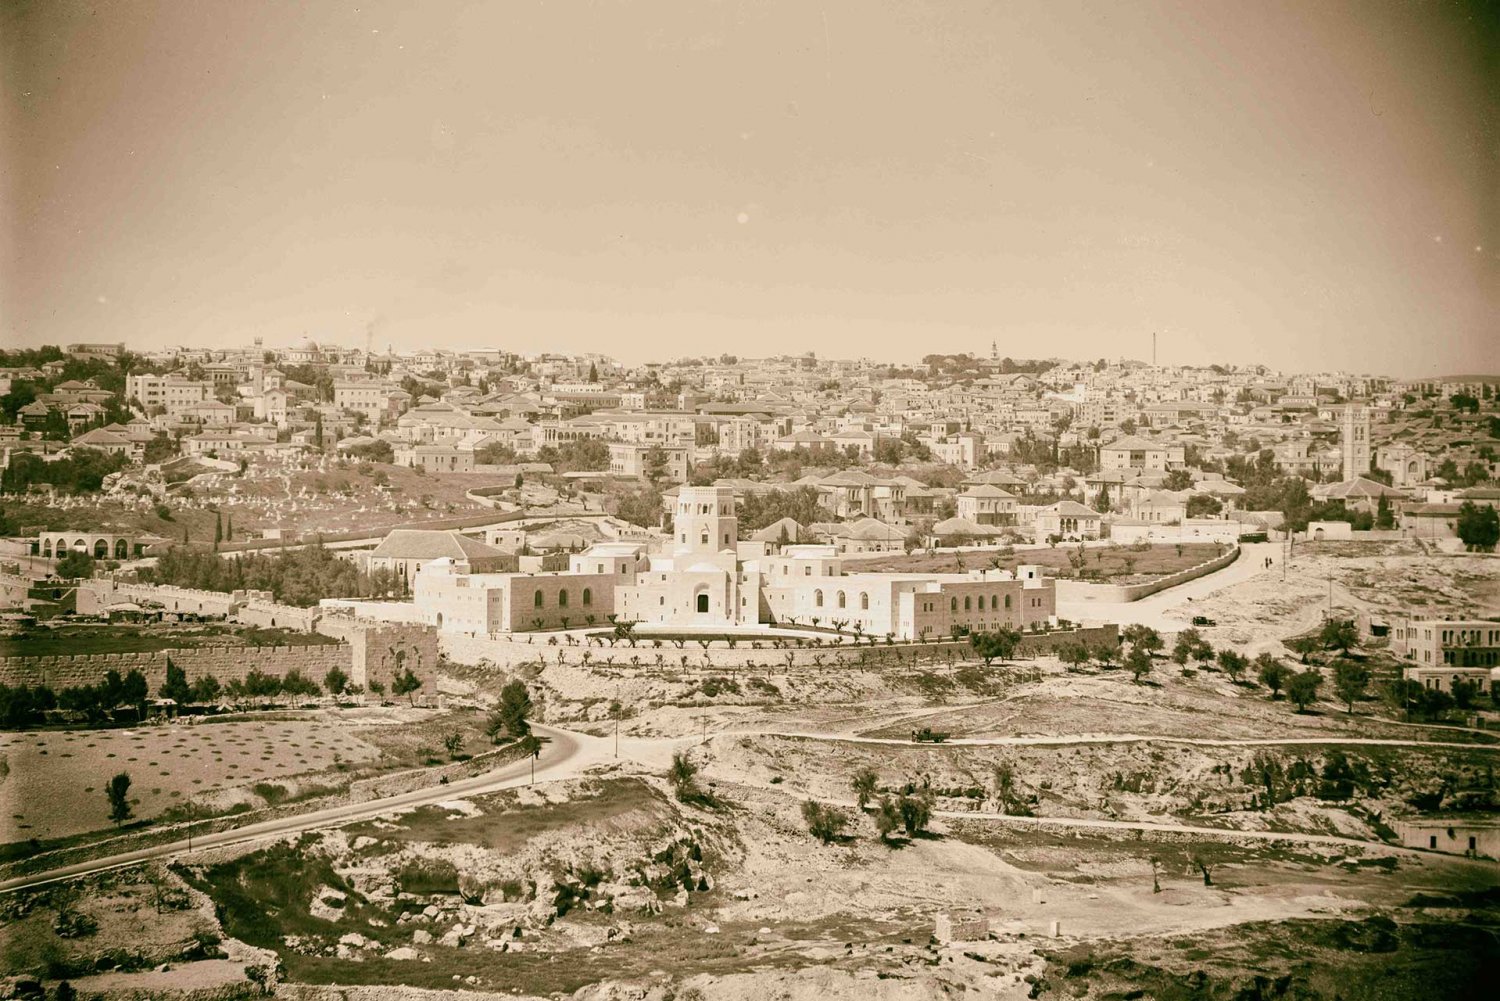 Newly completed Rockefeller Museum located beside the Old City wall of Jerusalem, 1934